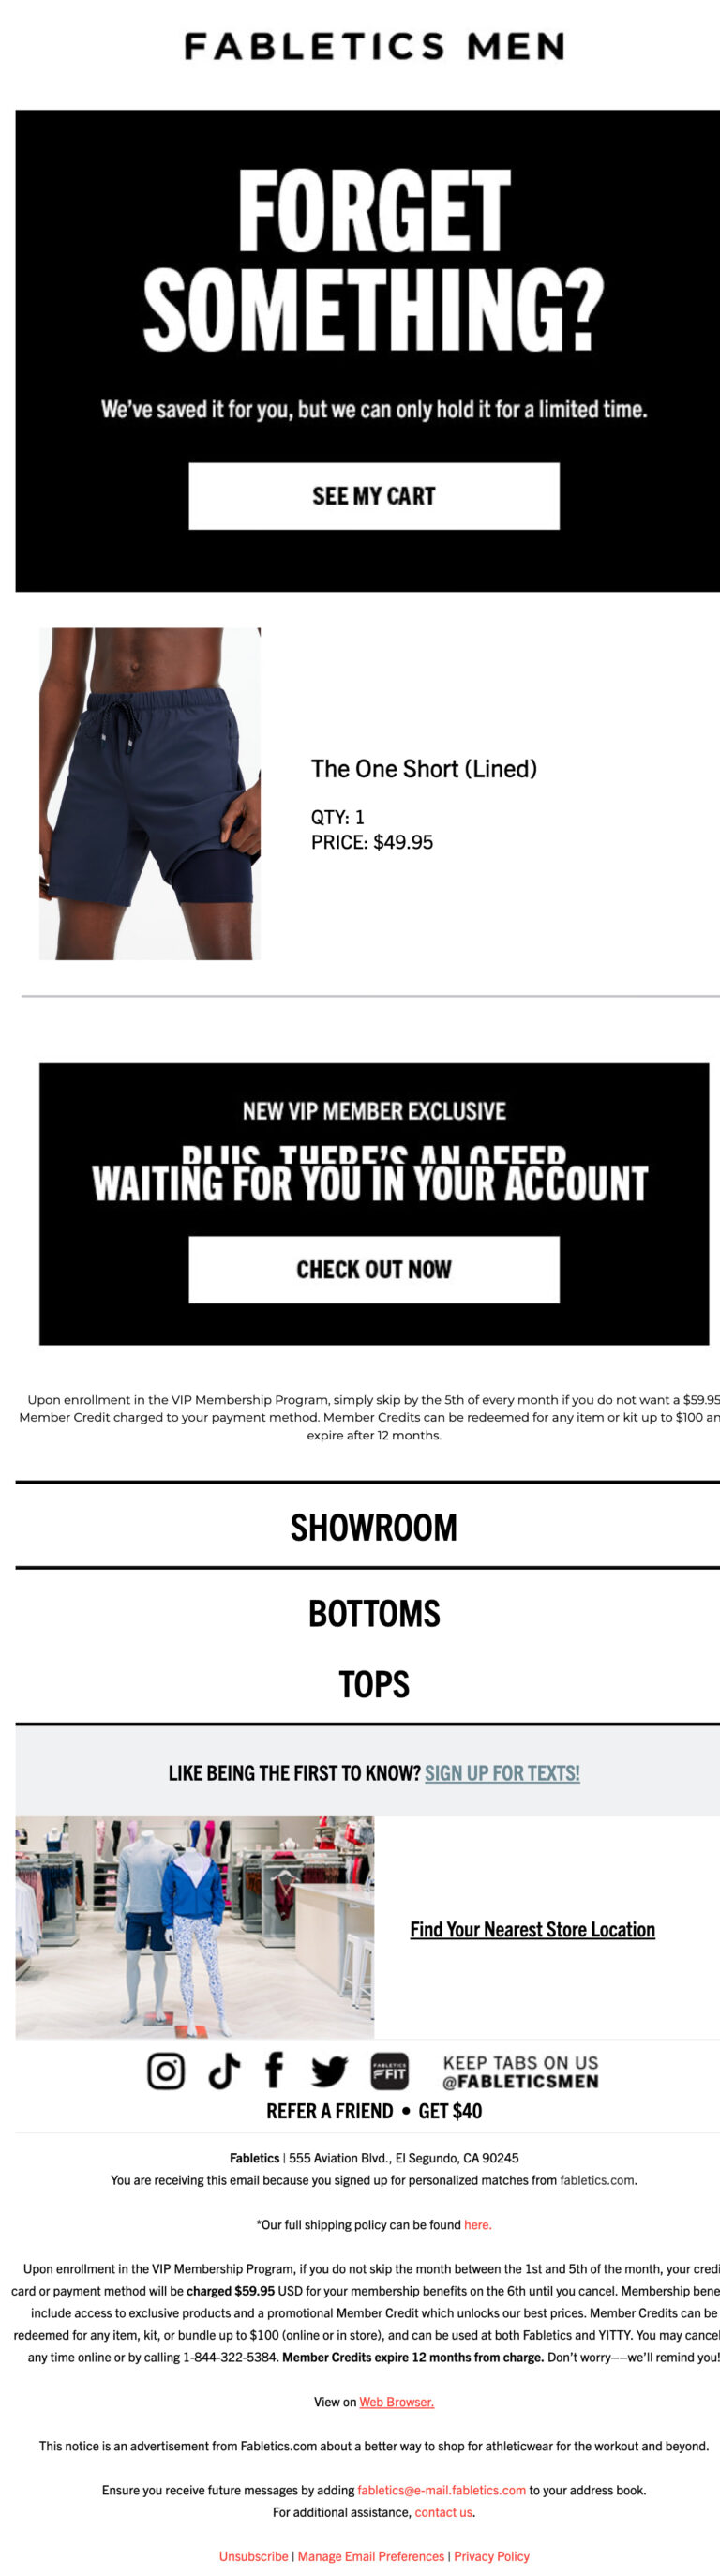 Abandoned Cart Email Examples: 6 Strategies for Success - Designmodo